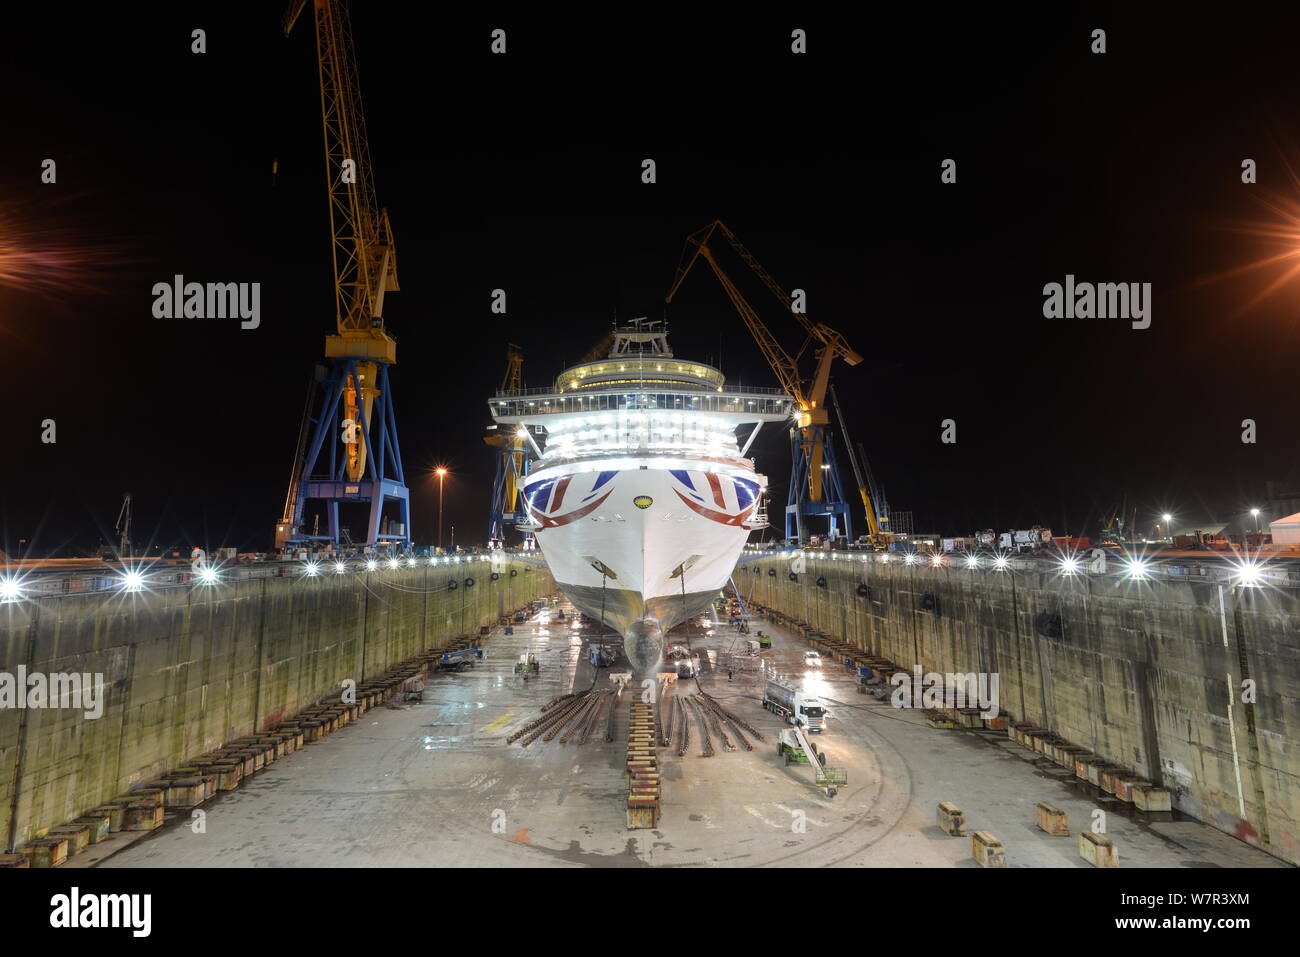 Wide view of full dry dock at night with P&O cruises ship Ventura illuminated in centre Stock Photo